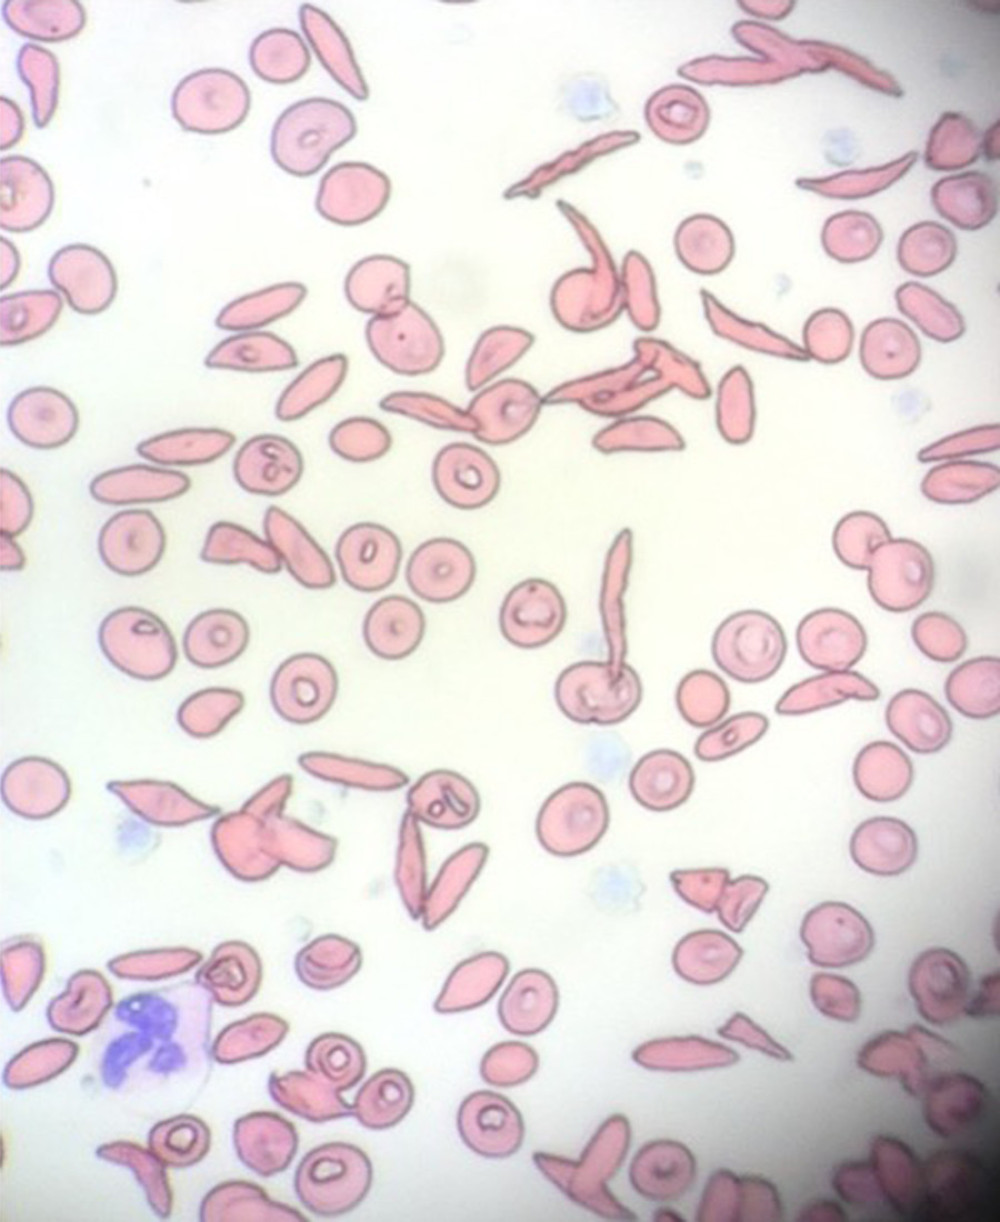 Photomicrograph of red blood cell (RBC) morphology from sickle cell disease SS (not this patient). Wrights-Giemsa stain. 40×. Photo by author. A few RBCs have the crescent shape that is classically described as a “sickled cell.” About half of the RBCs are elongated but not crescents. About half of the RBCs are round, with the normal biconcave disc shape. This variation in RBC shape could represent ex vivo oxygenation, dehydration, or other conditions outside the body. A normal neutrophil is seen at the lower left corner. Normal platelets are present but out of focus in this image.